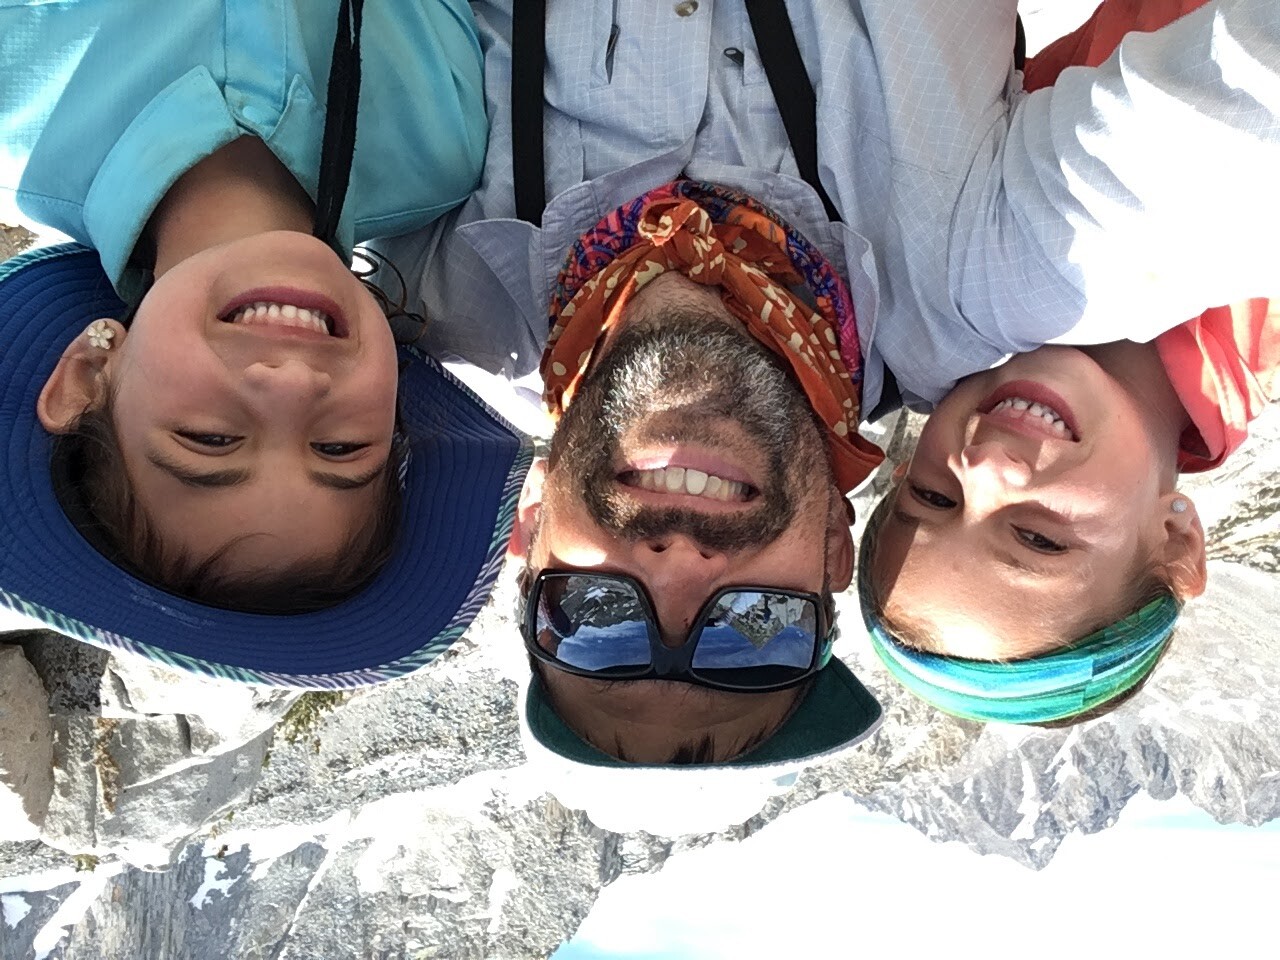 man and two children enjoying the high mountain sun on a backpacking trip